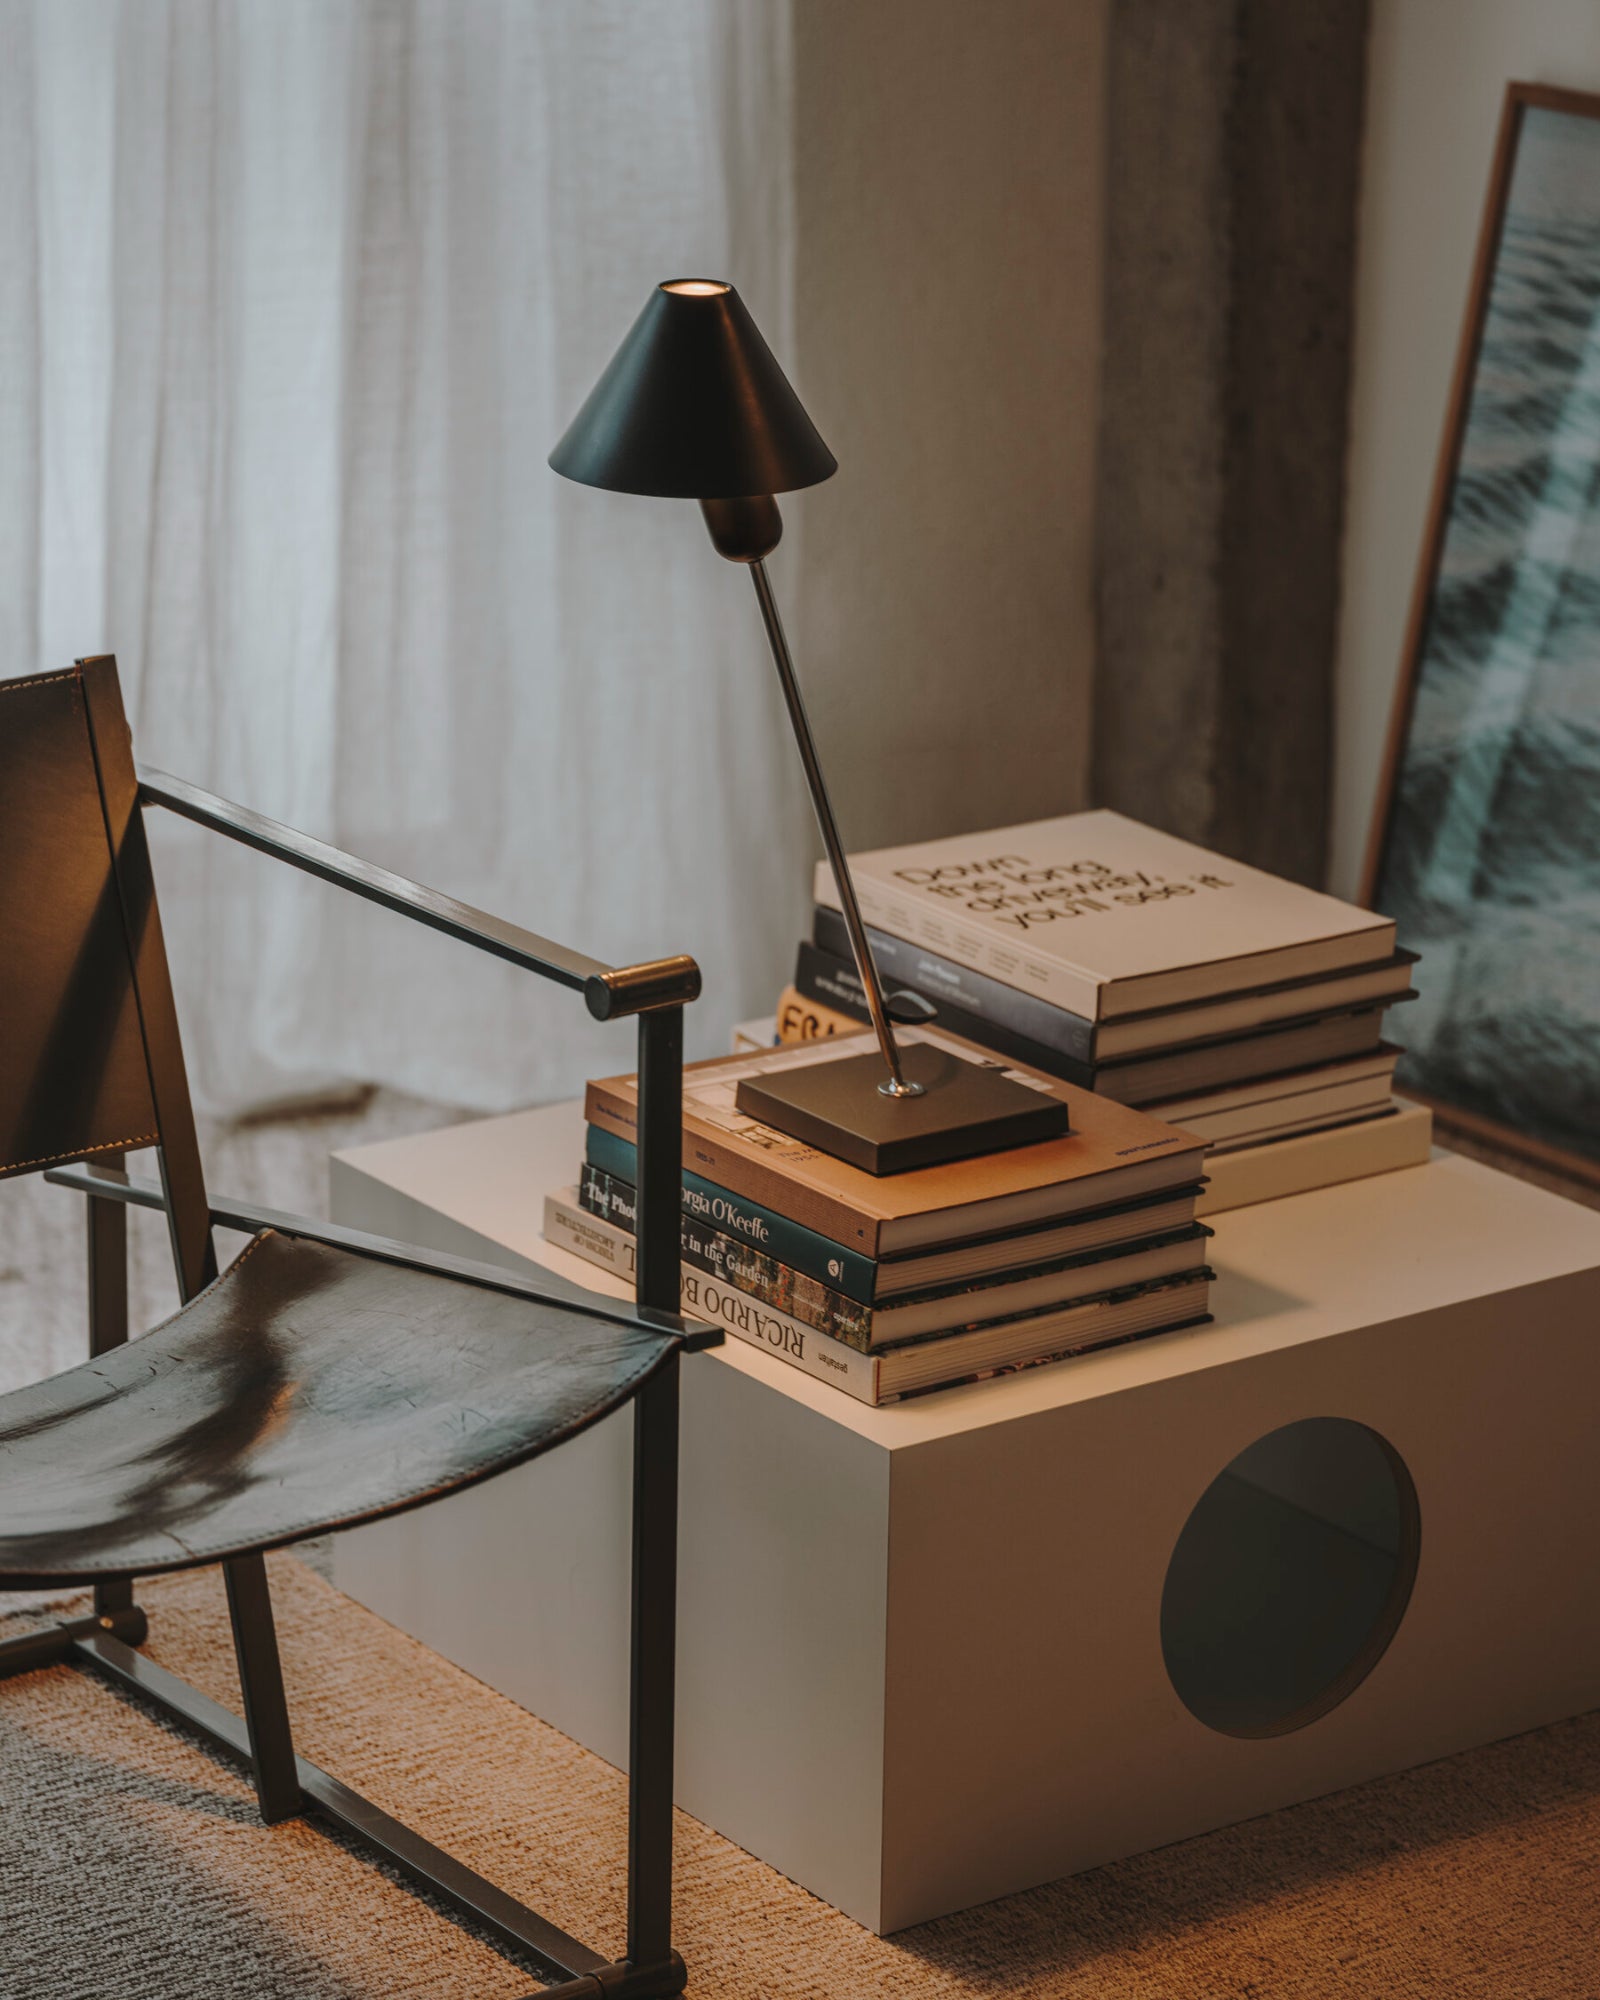 Gira Table Lamp by Santa & Cole featured in a living space | Nook Collections